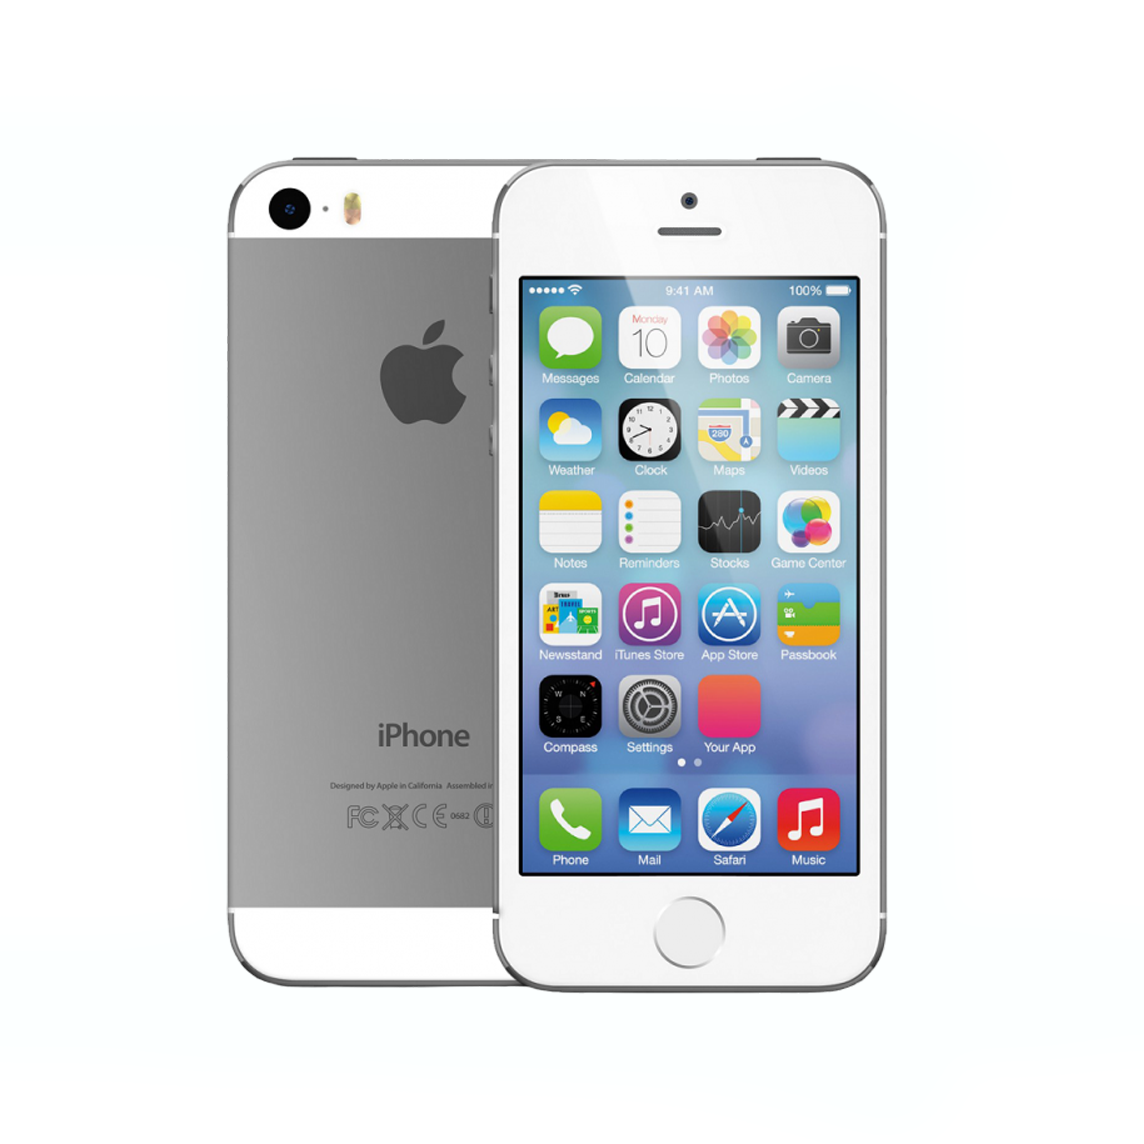 Refurbished Apple iPhone 5S Unlocked Mobile Phone in White Grey Colour